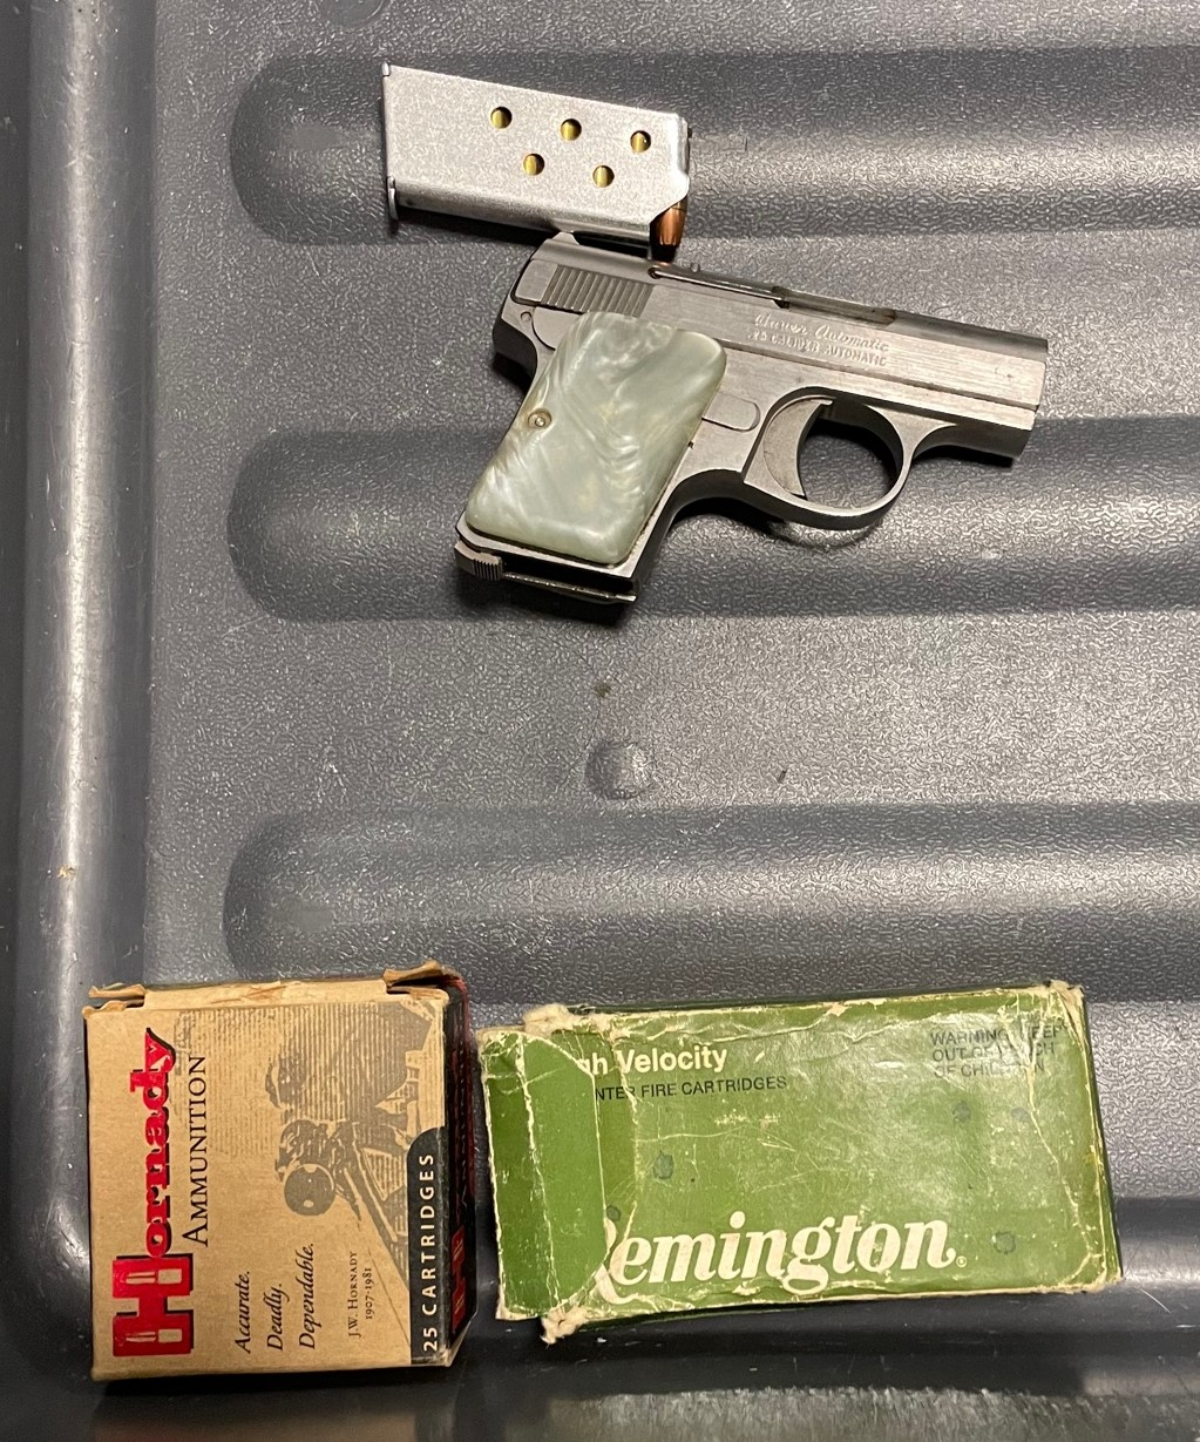 Harrisburg Airport Gun and Ammunition Confiscated July 2022